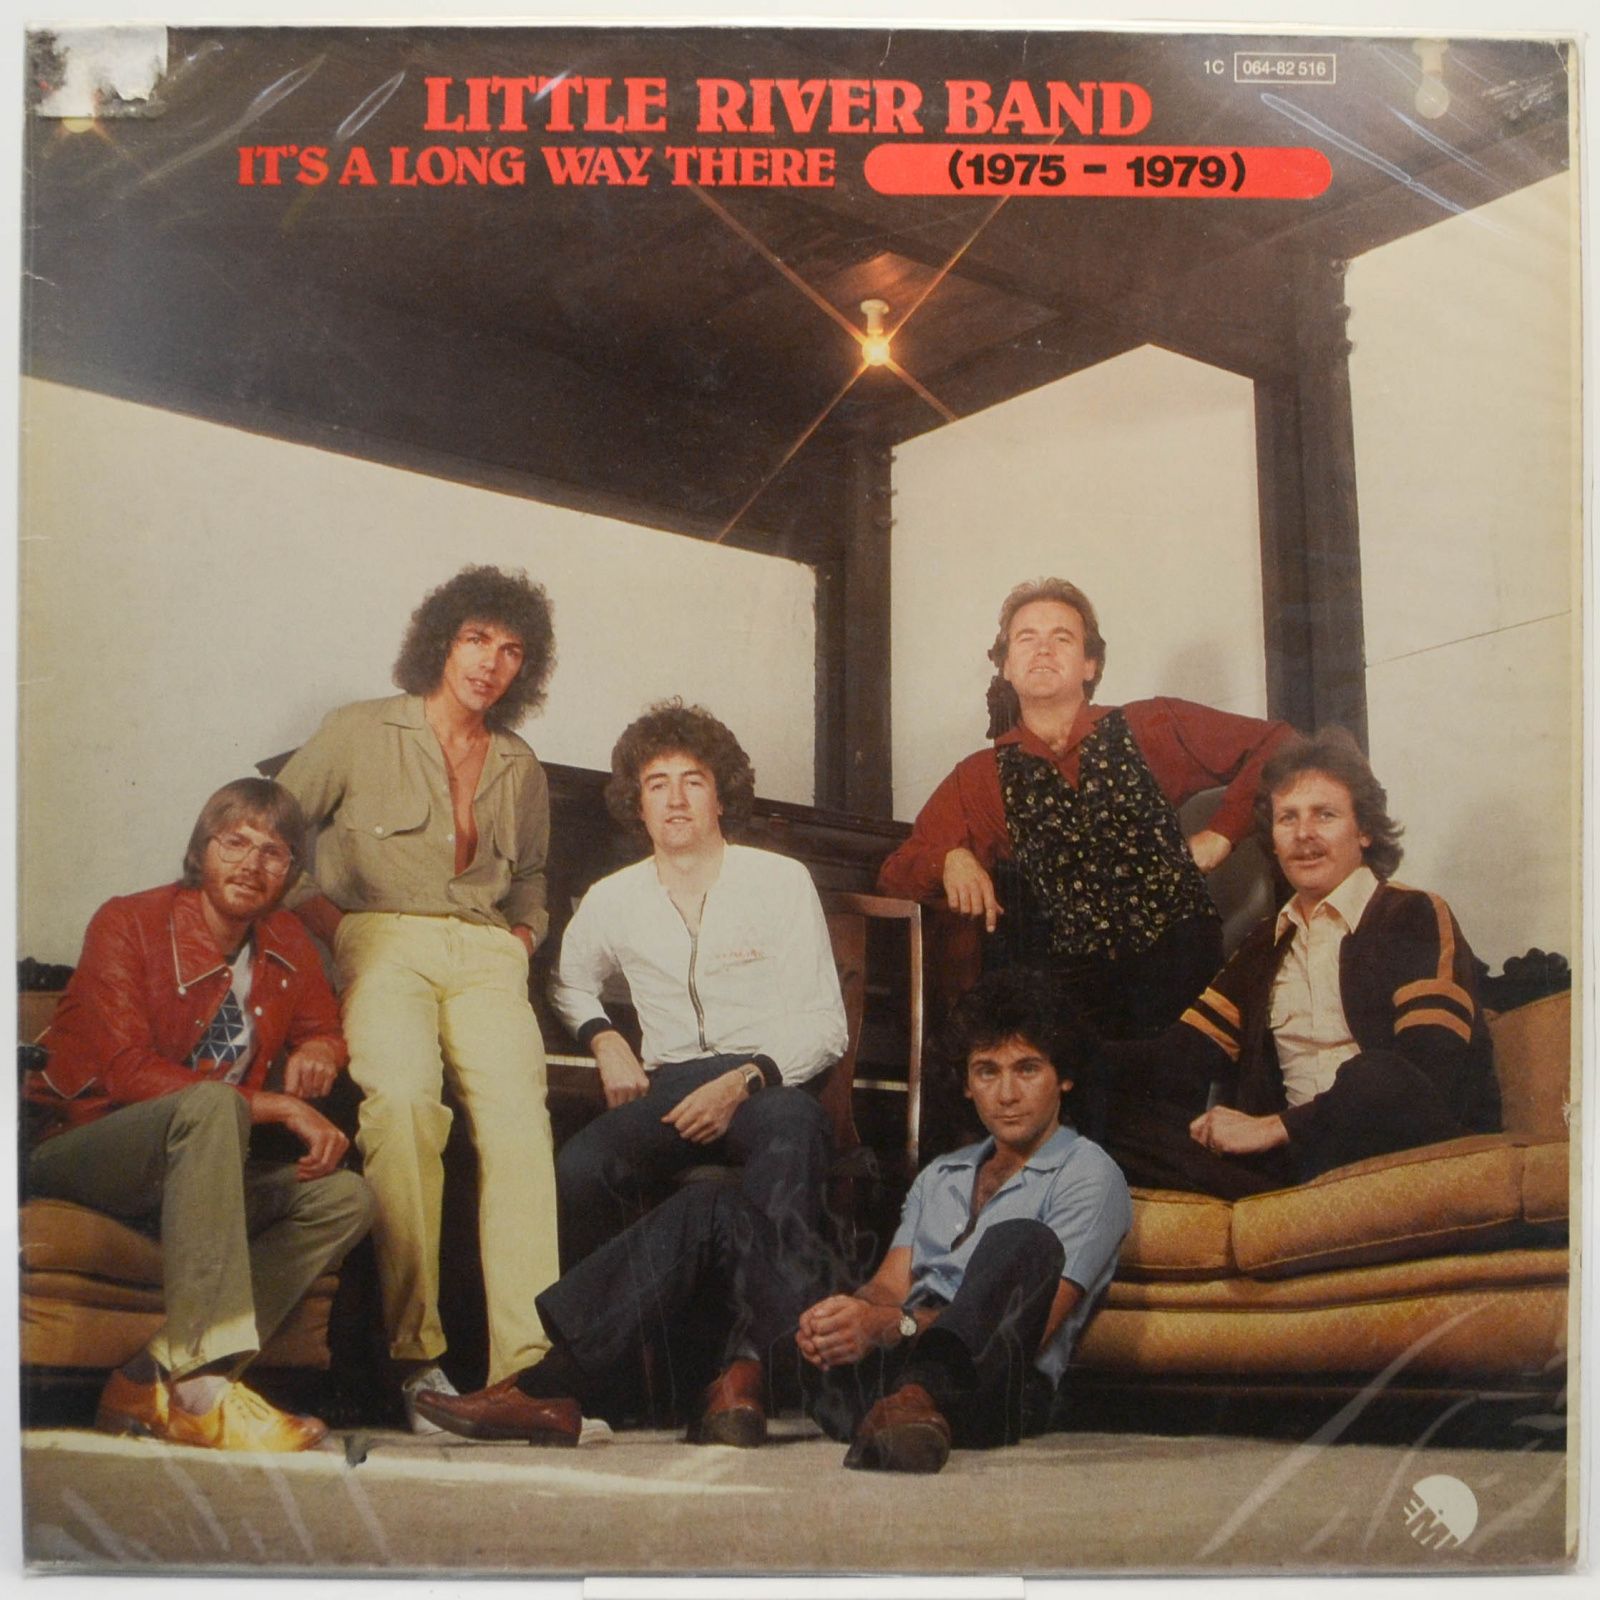 Little River Band — It's A Long Way There (1975-1979), 1978